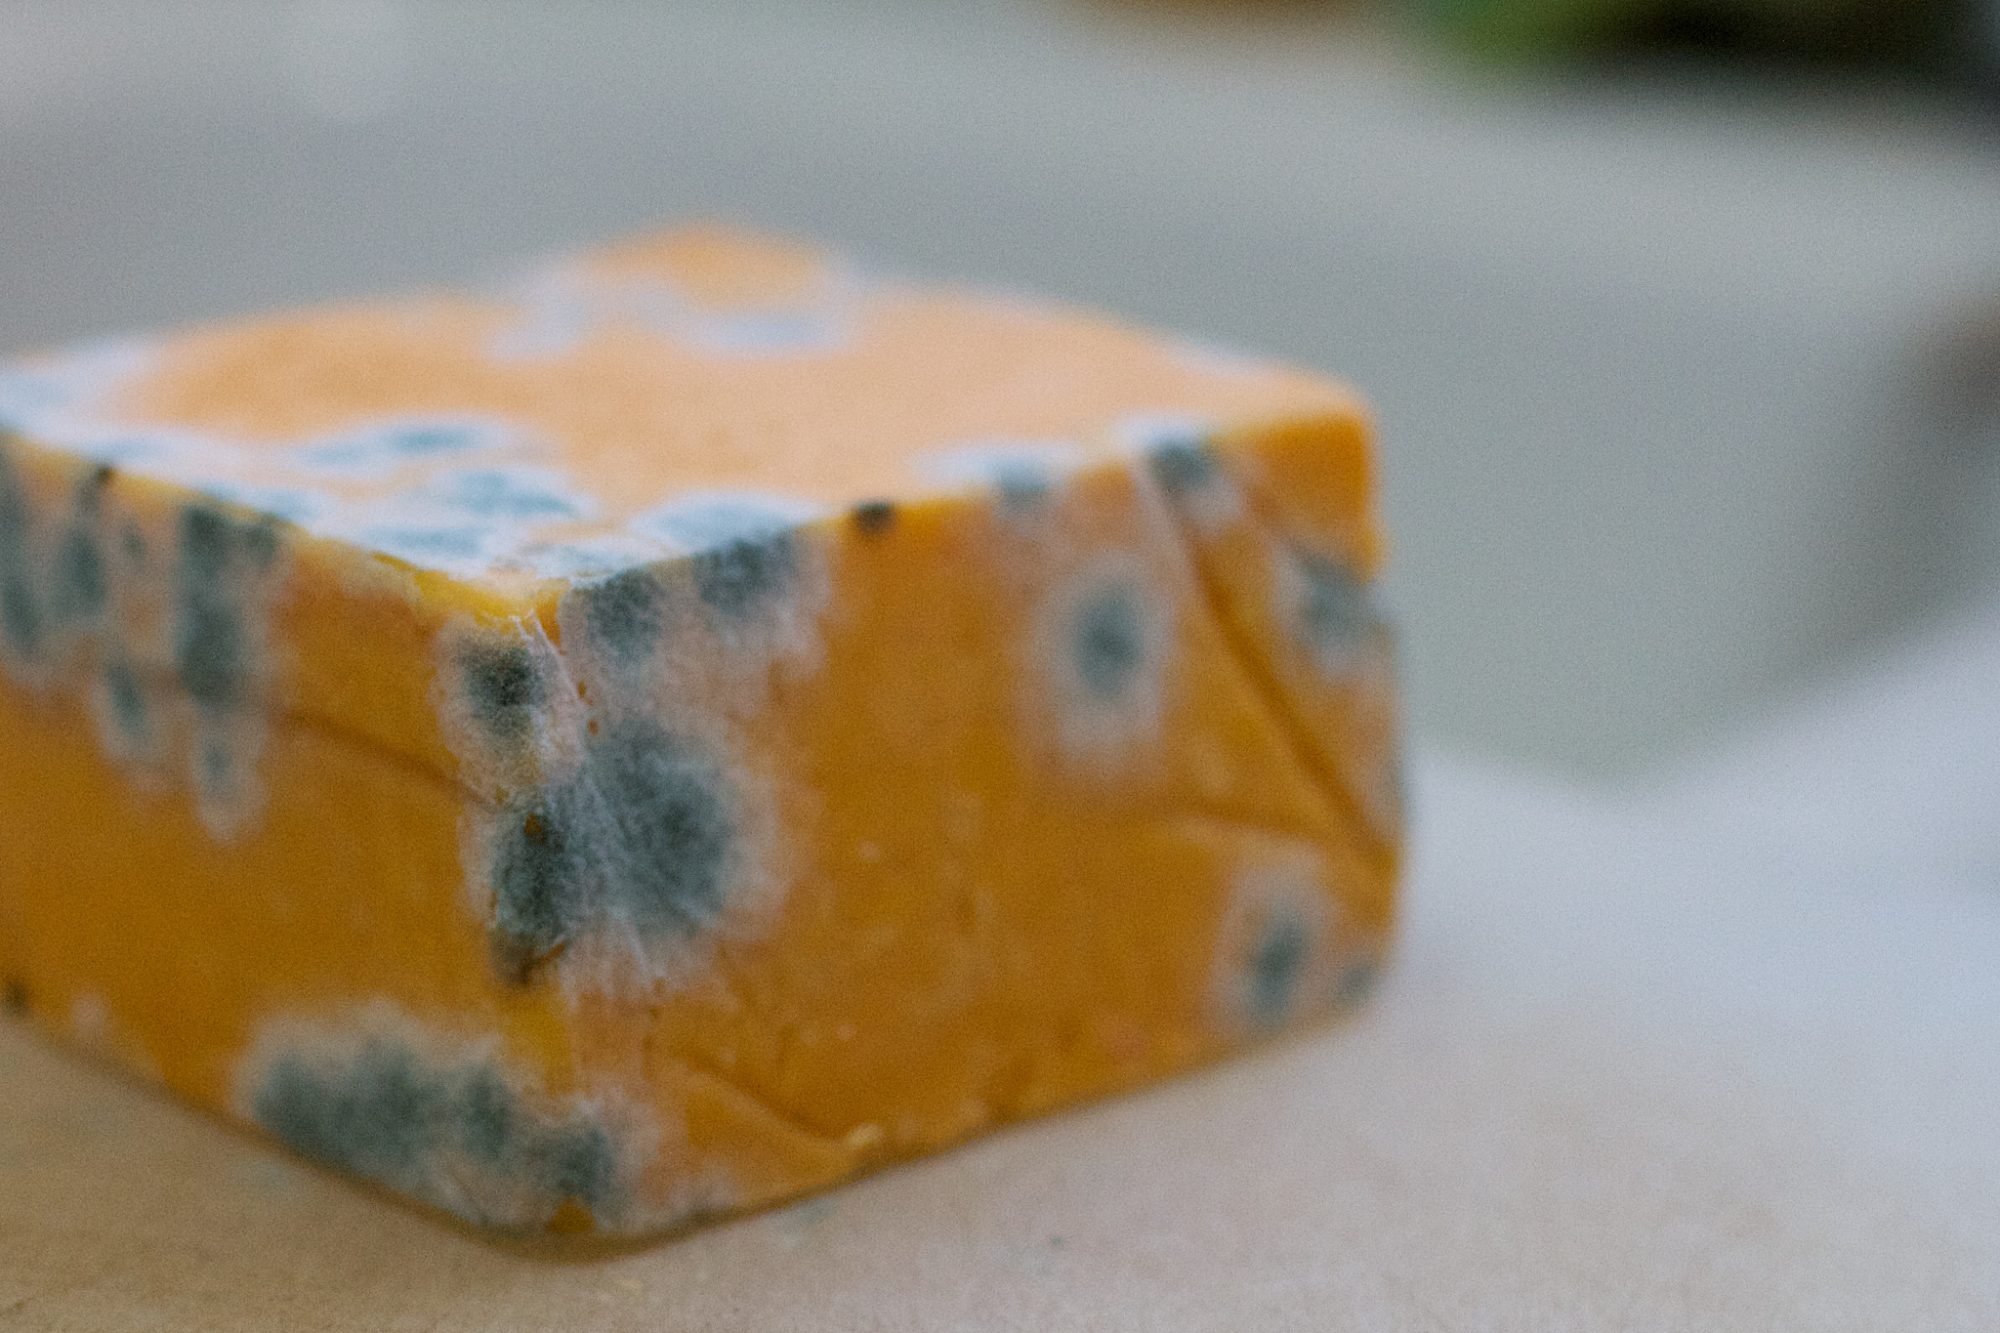 EC: Is Mold on Cheese Bad for You?